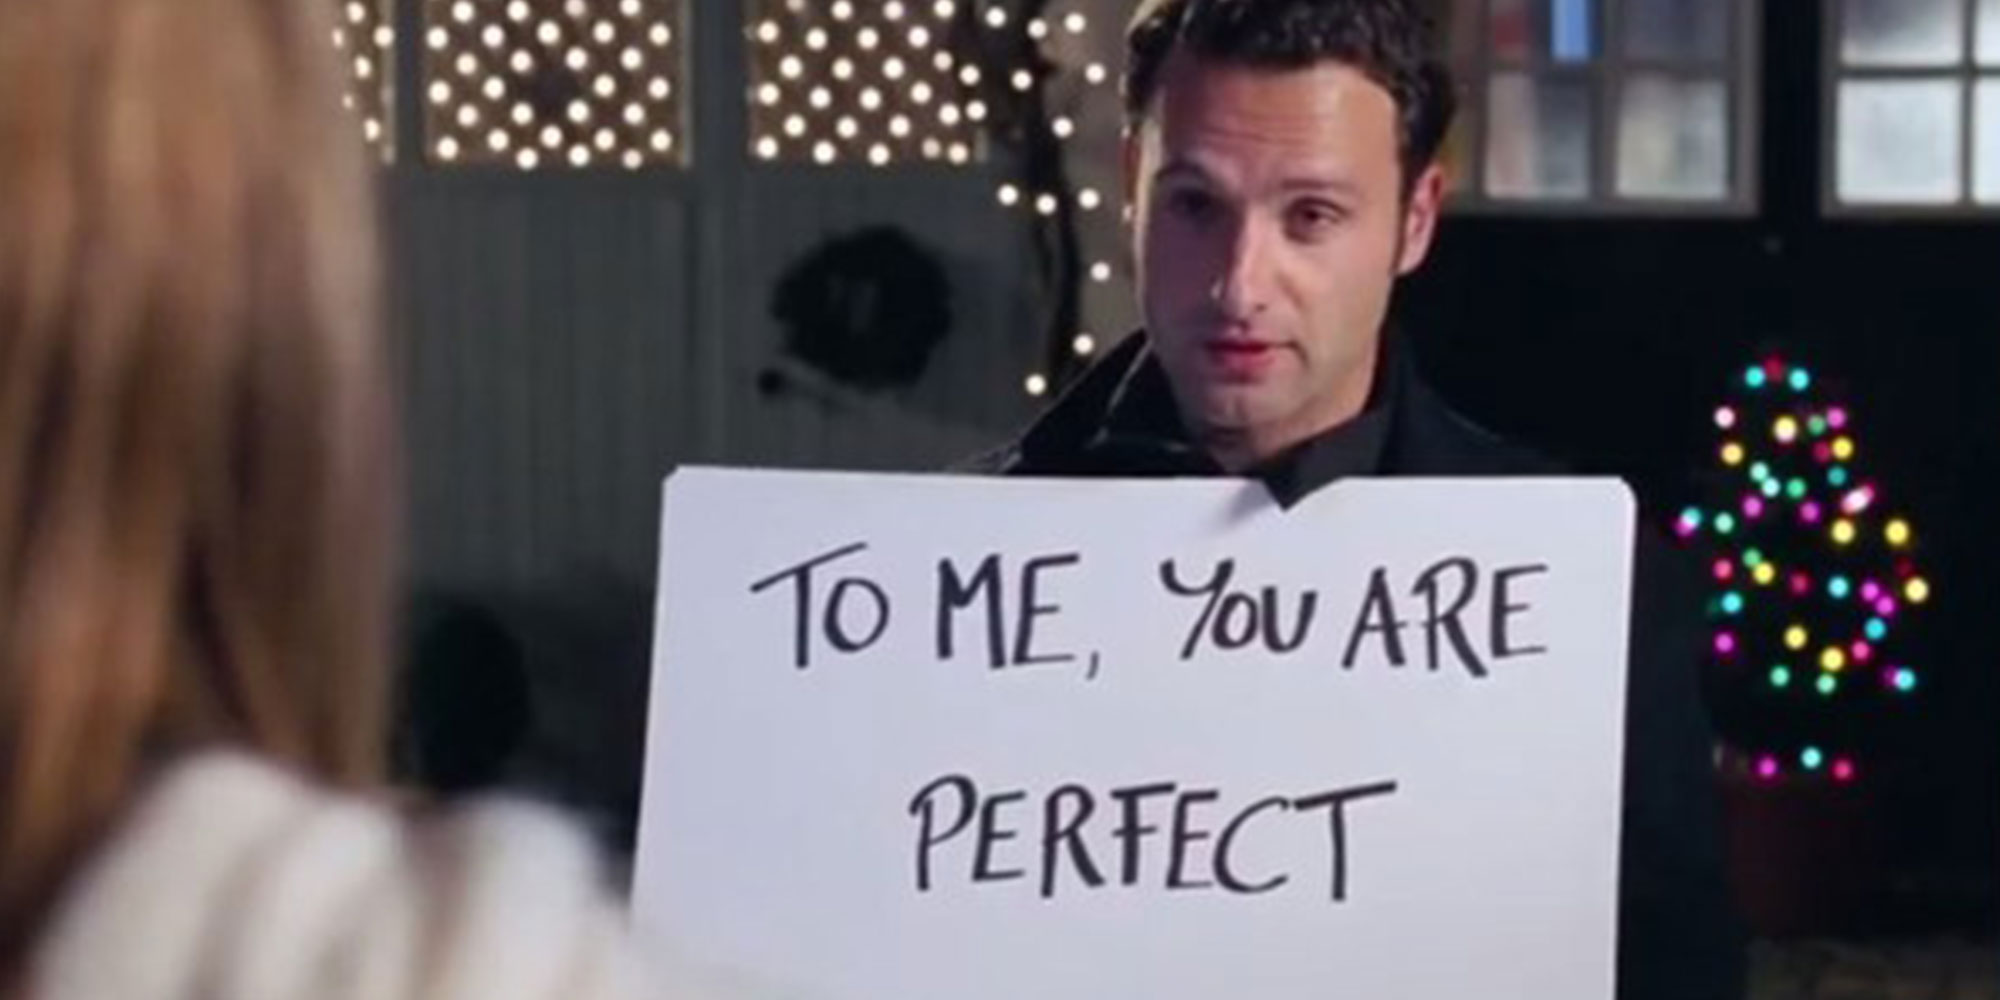 love actually to me you are perfect